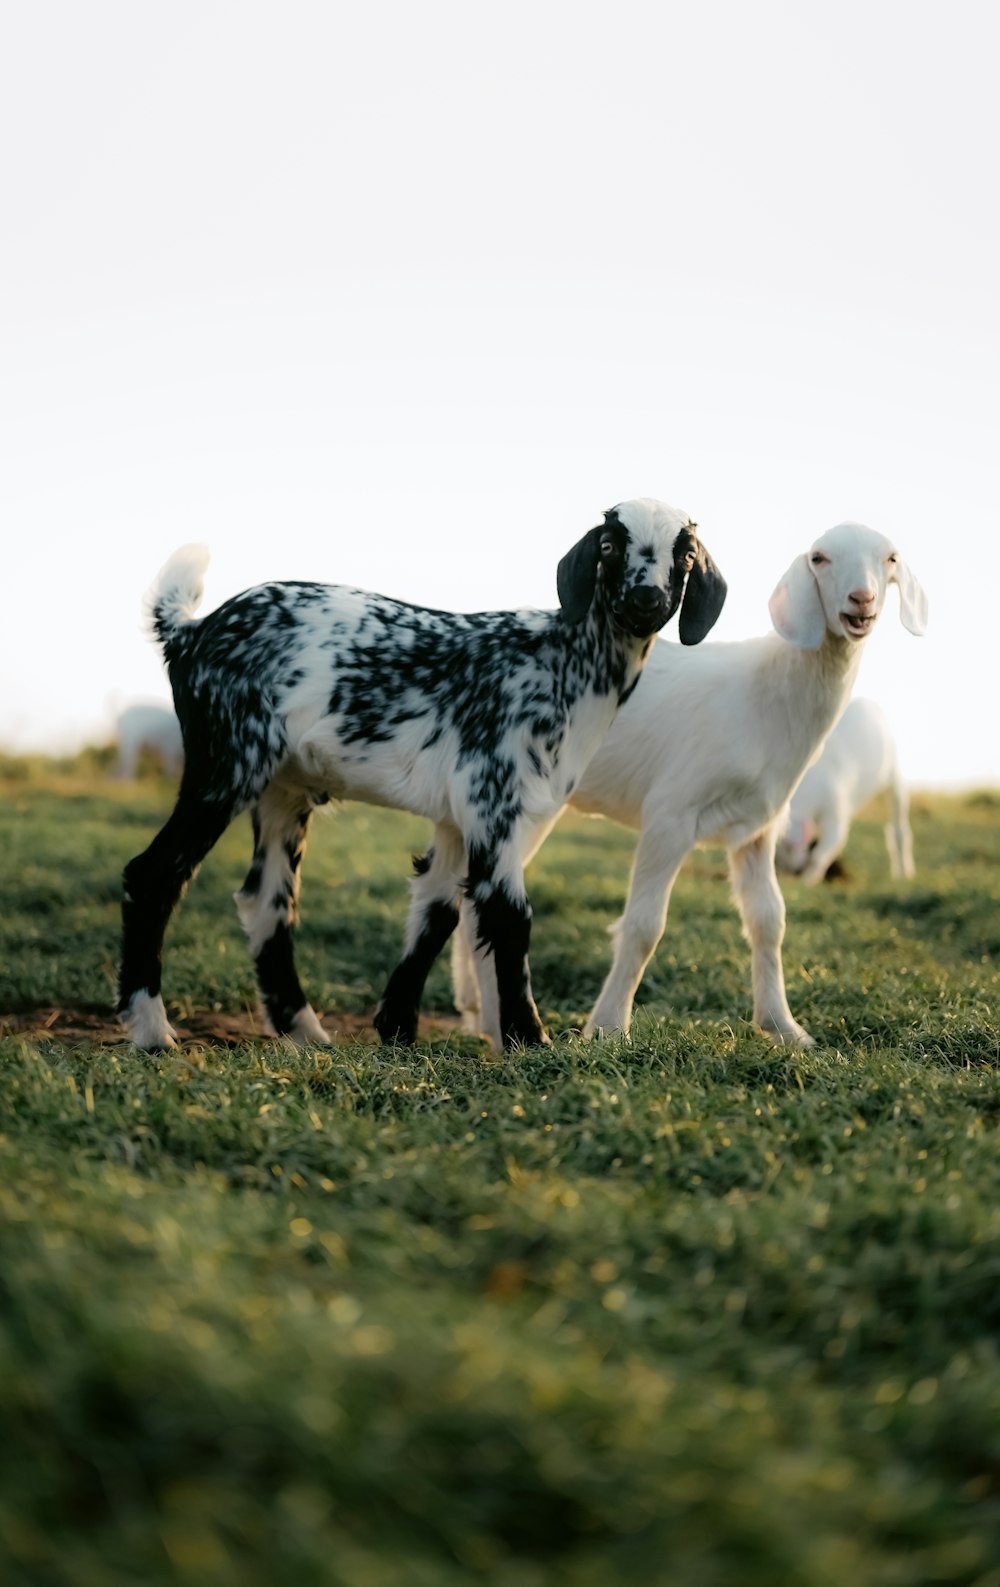 two black and white lambs standing in a grassy field